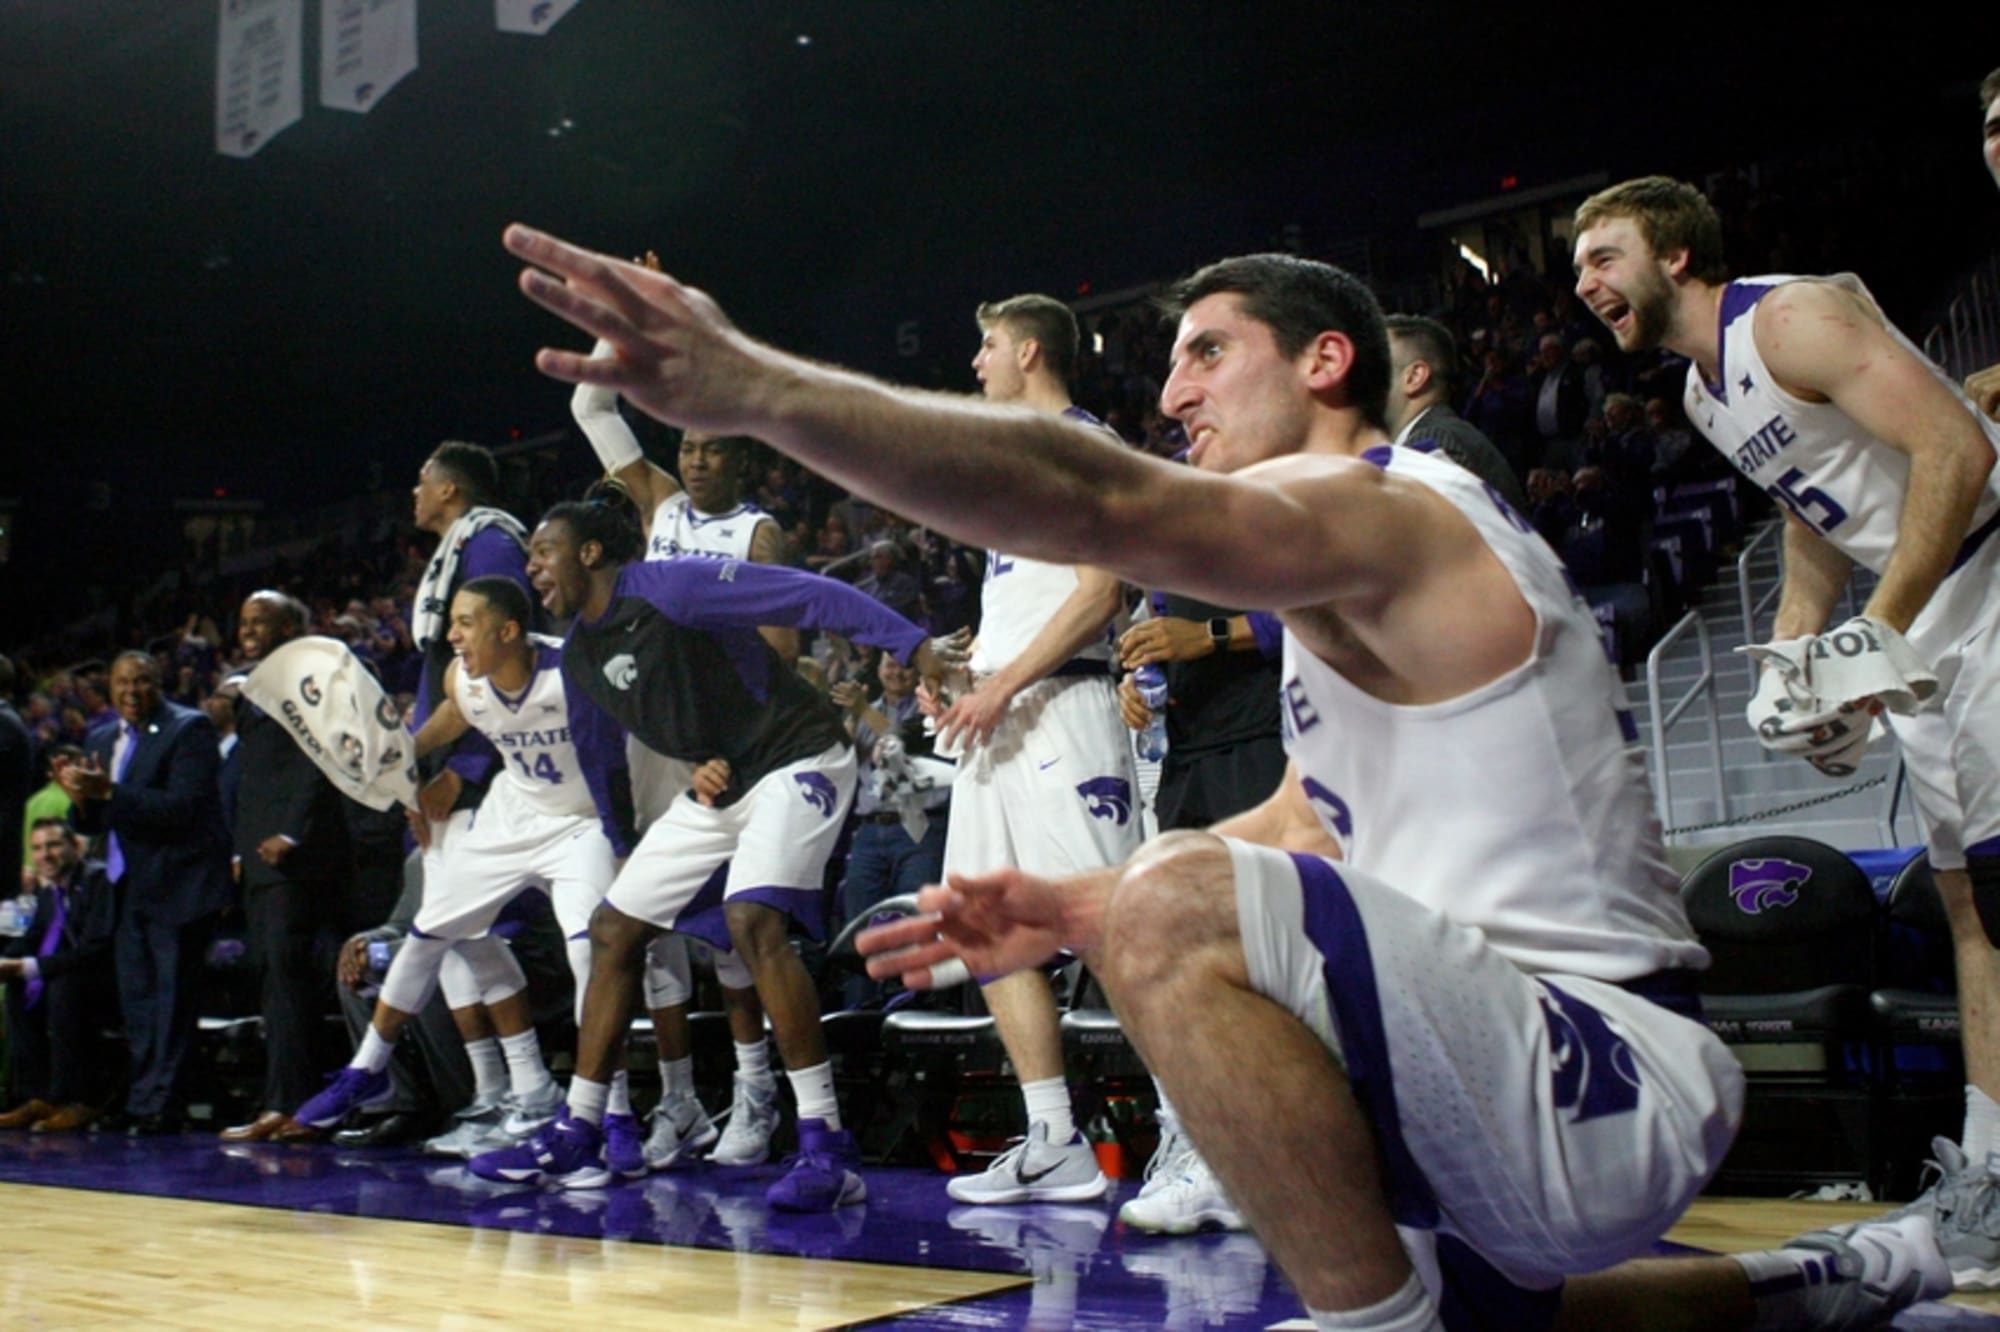 Kansas State Basketball: Can the Wildcats exit the Big 12 cellar?